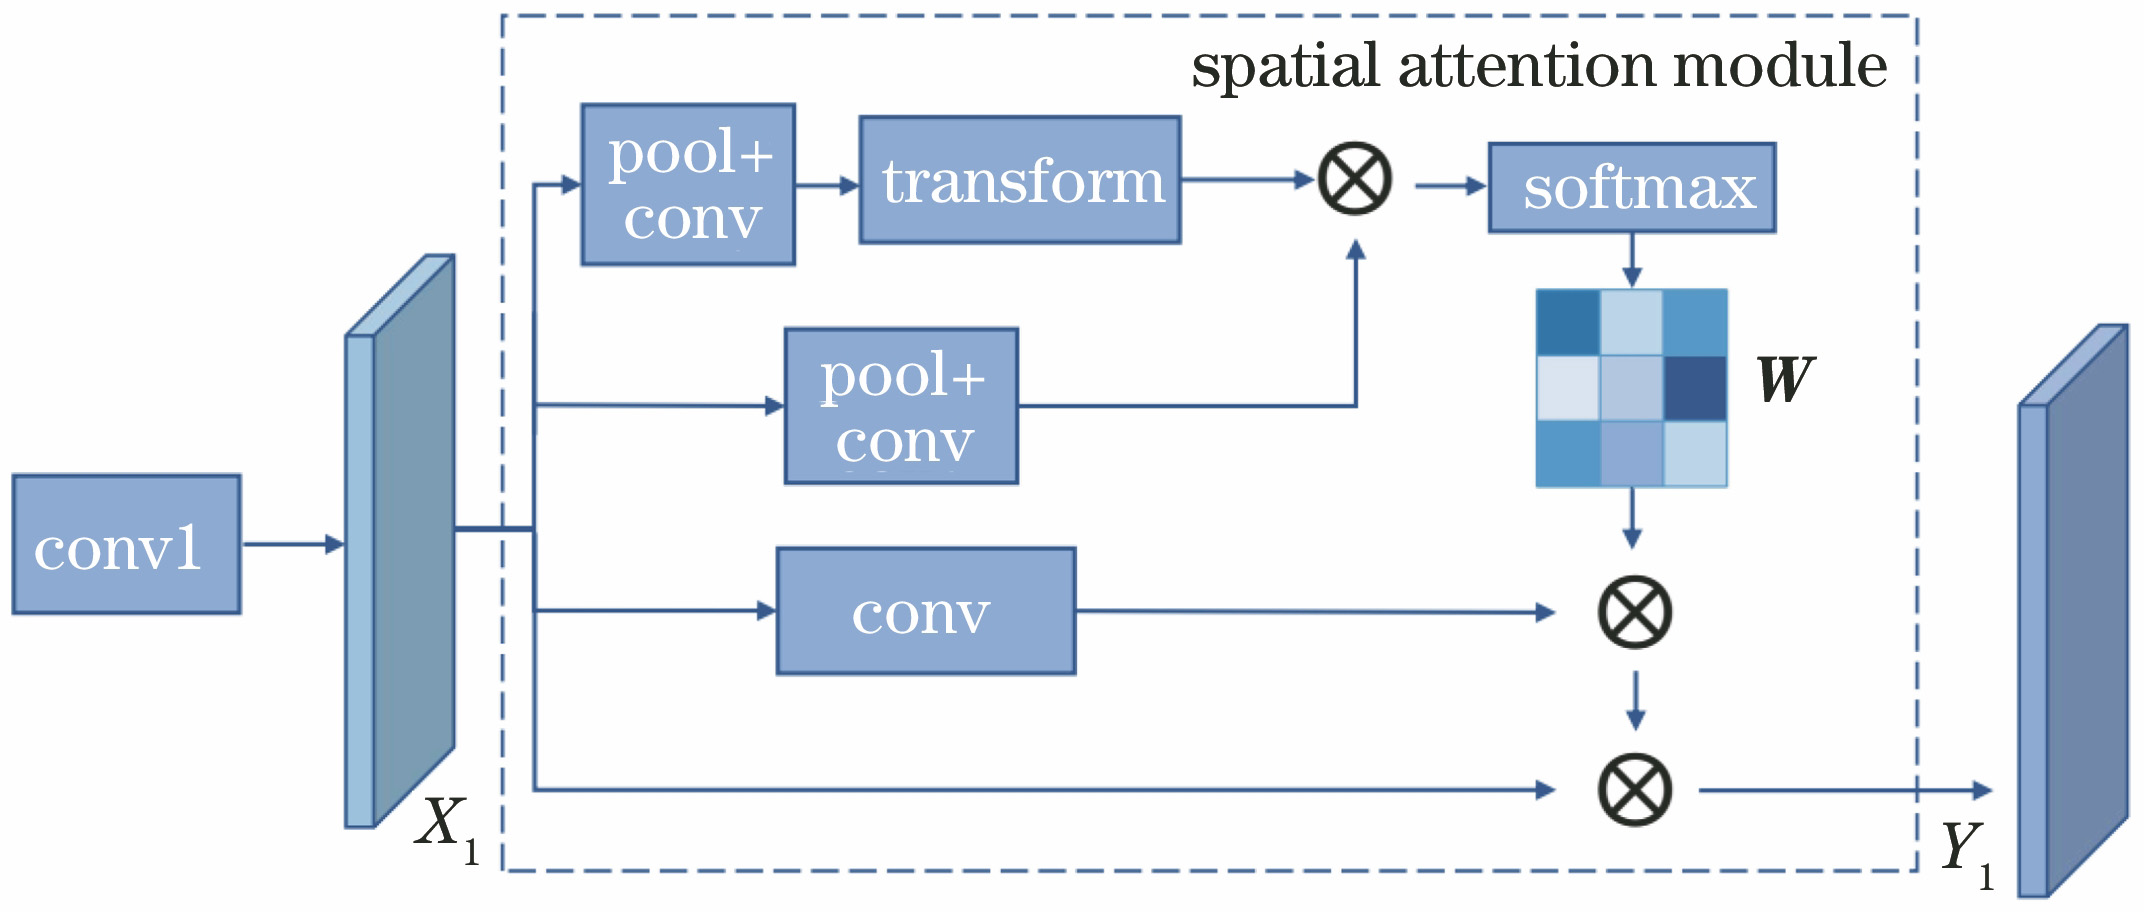 Calculation process in spatial attention module